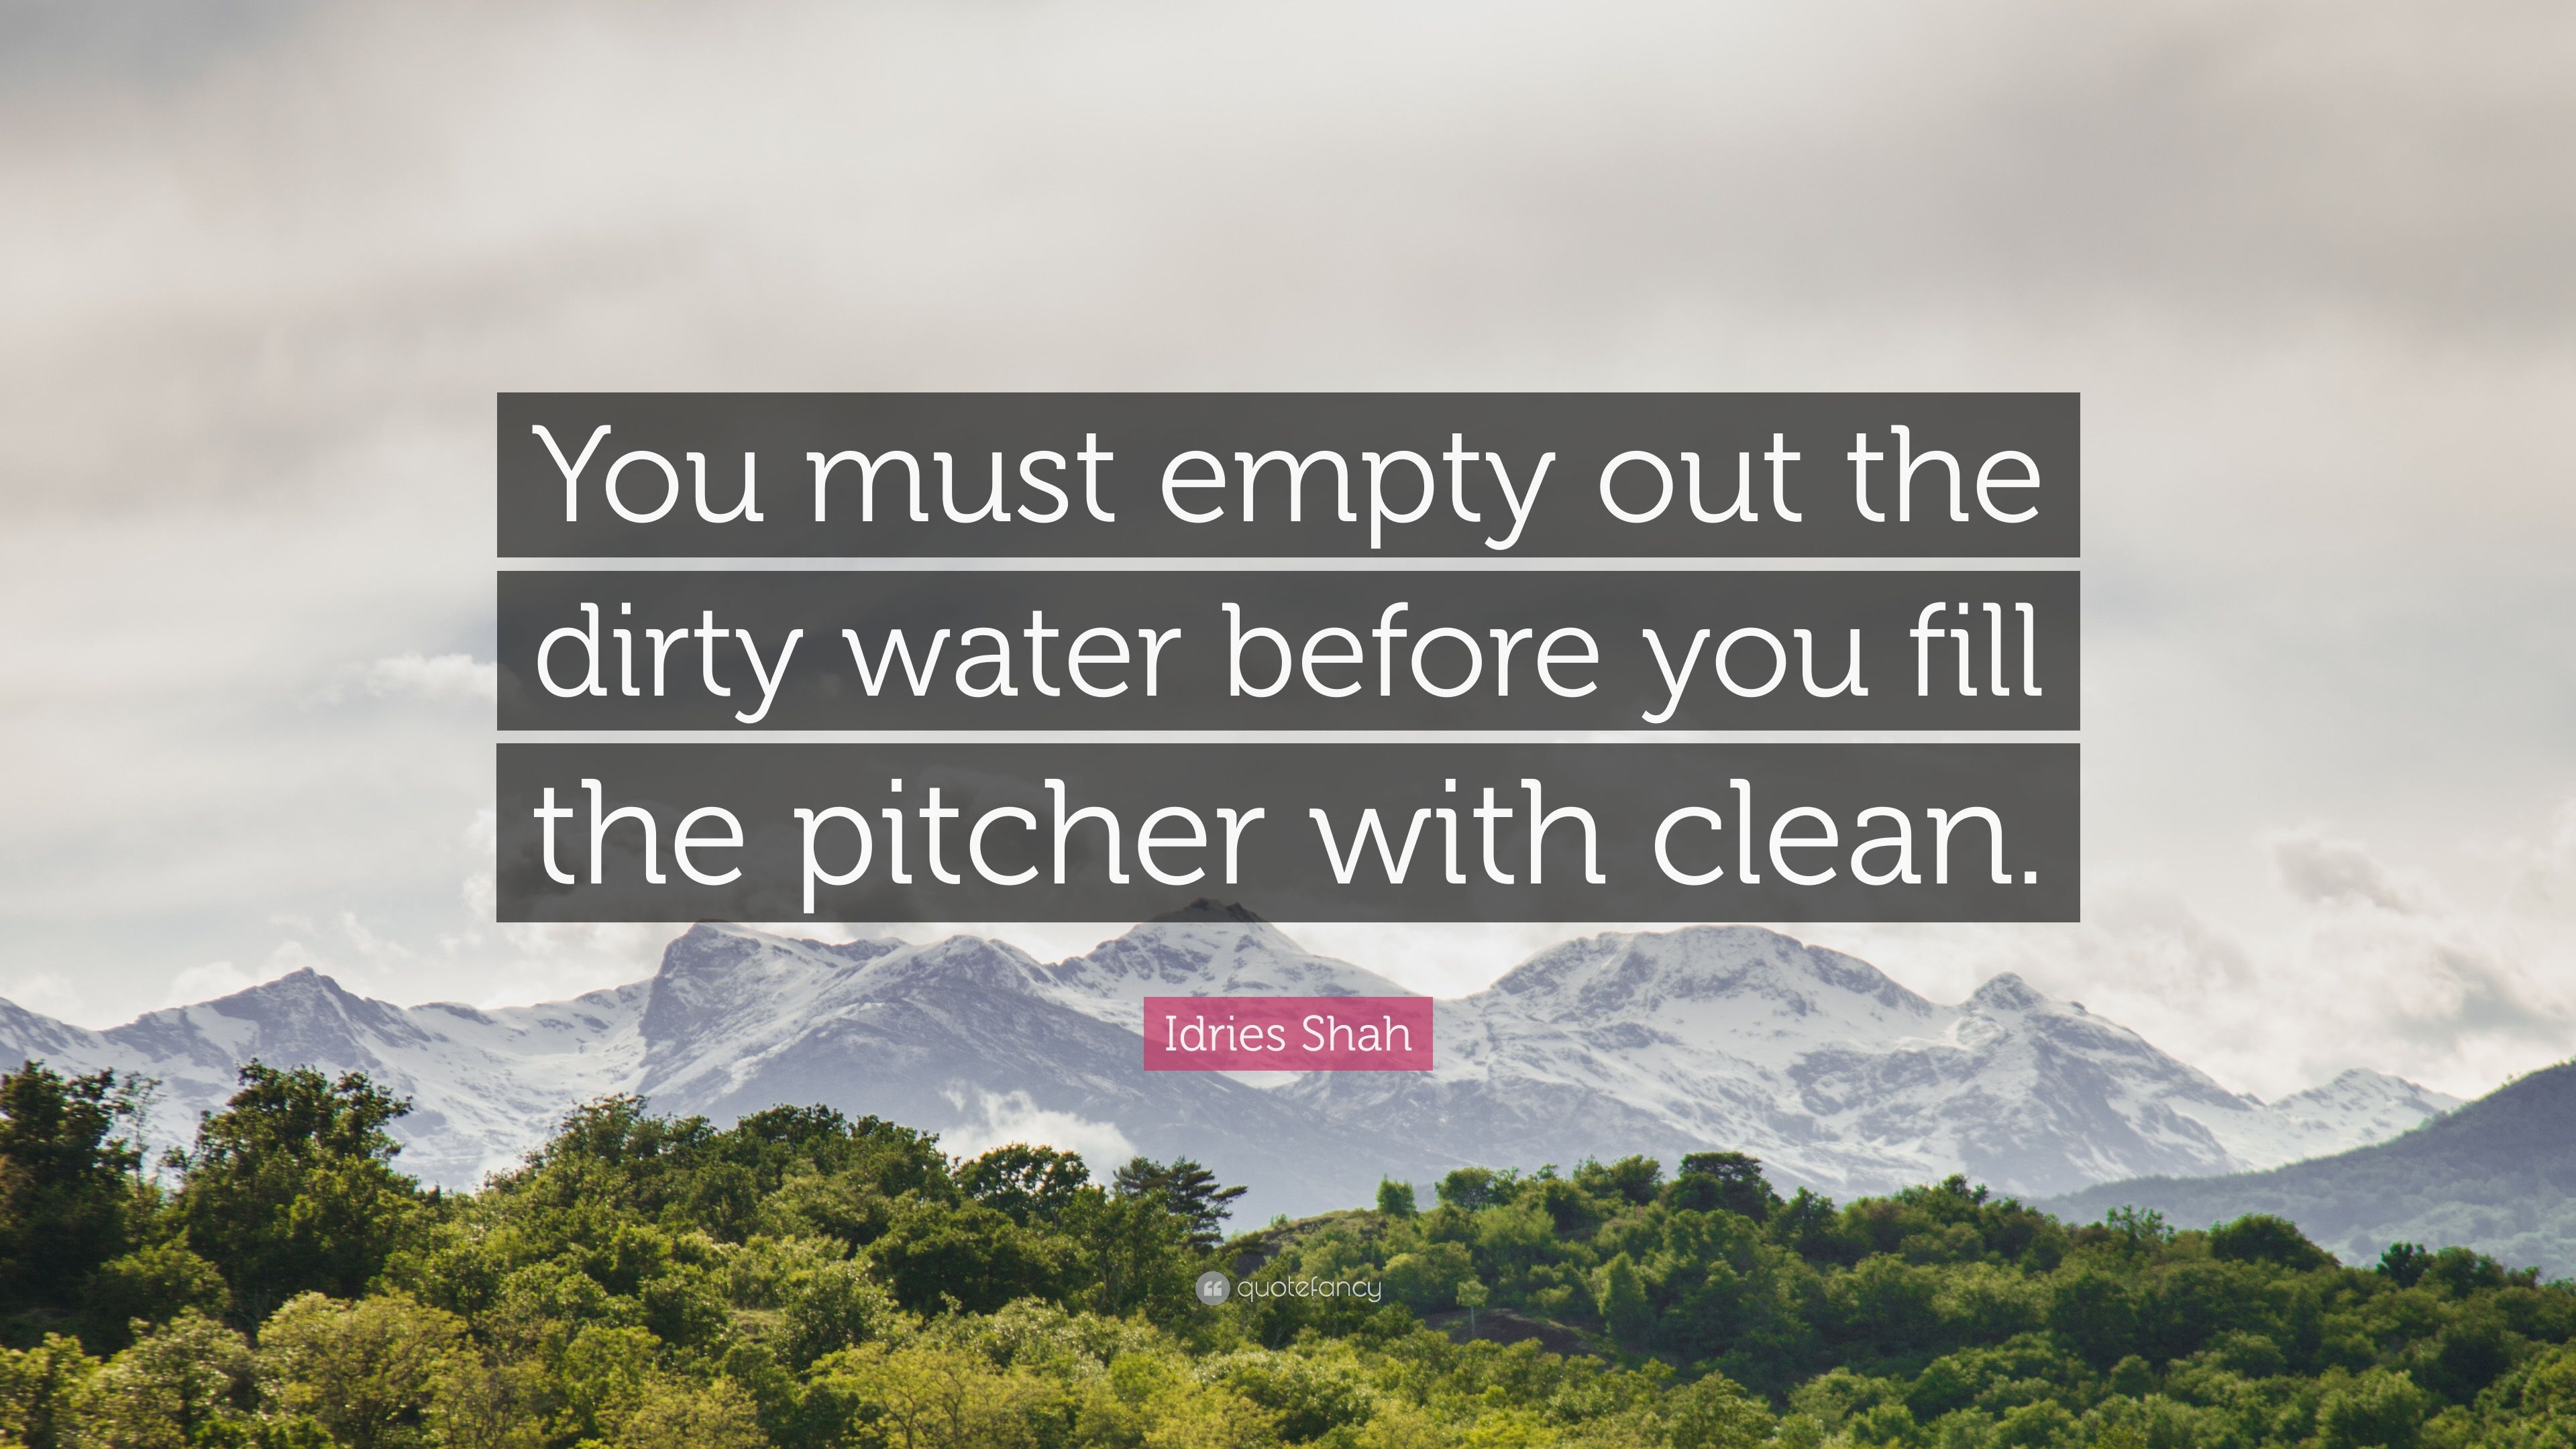 Idries Shah Quote: “You must empty out the dirty water before you